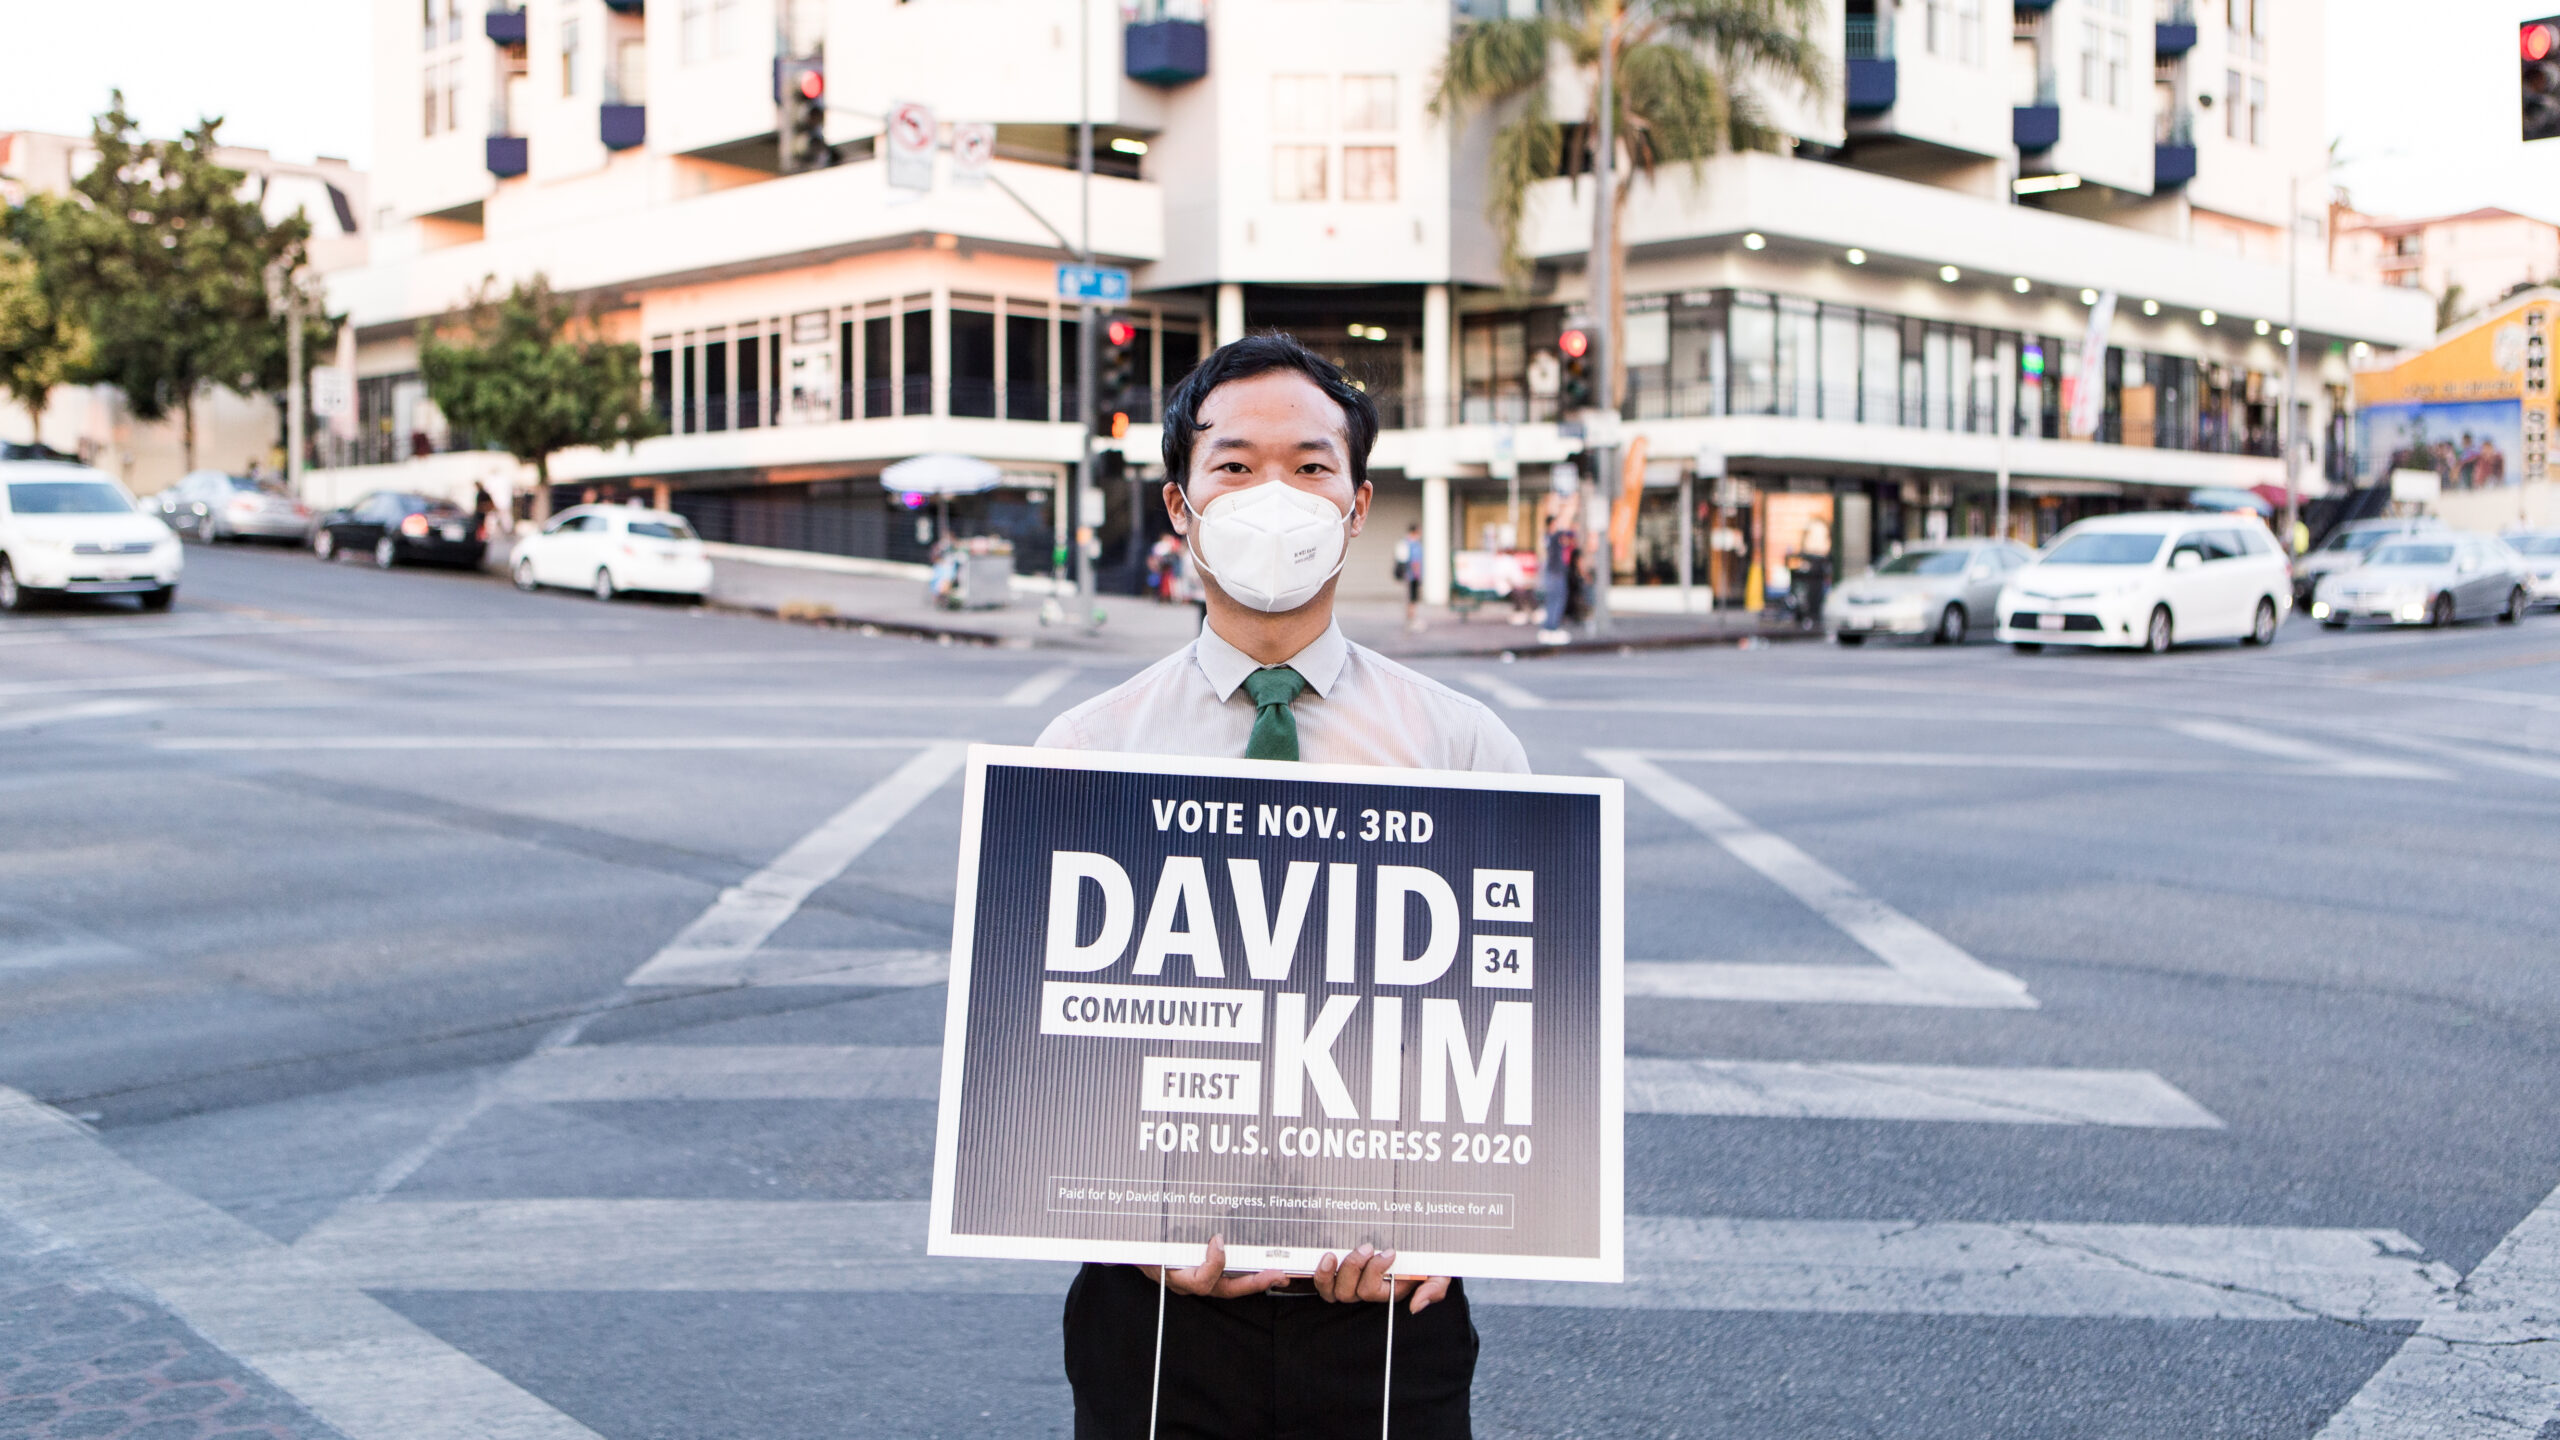 David Kim is running an election campaign in his district